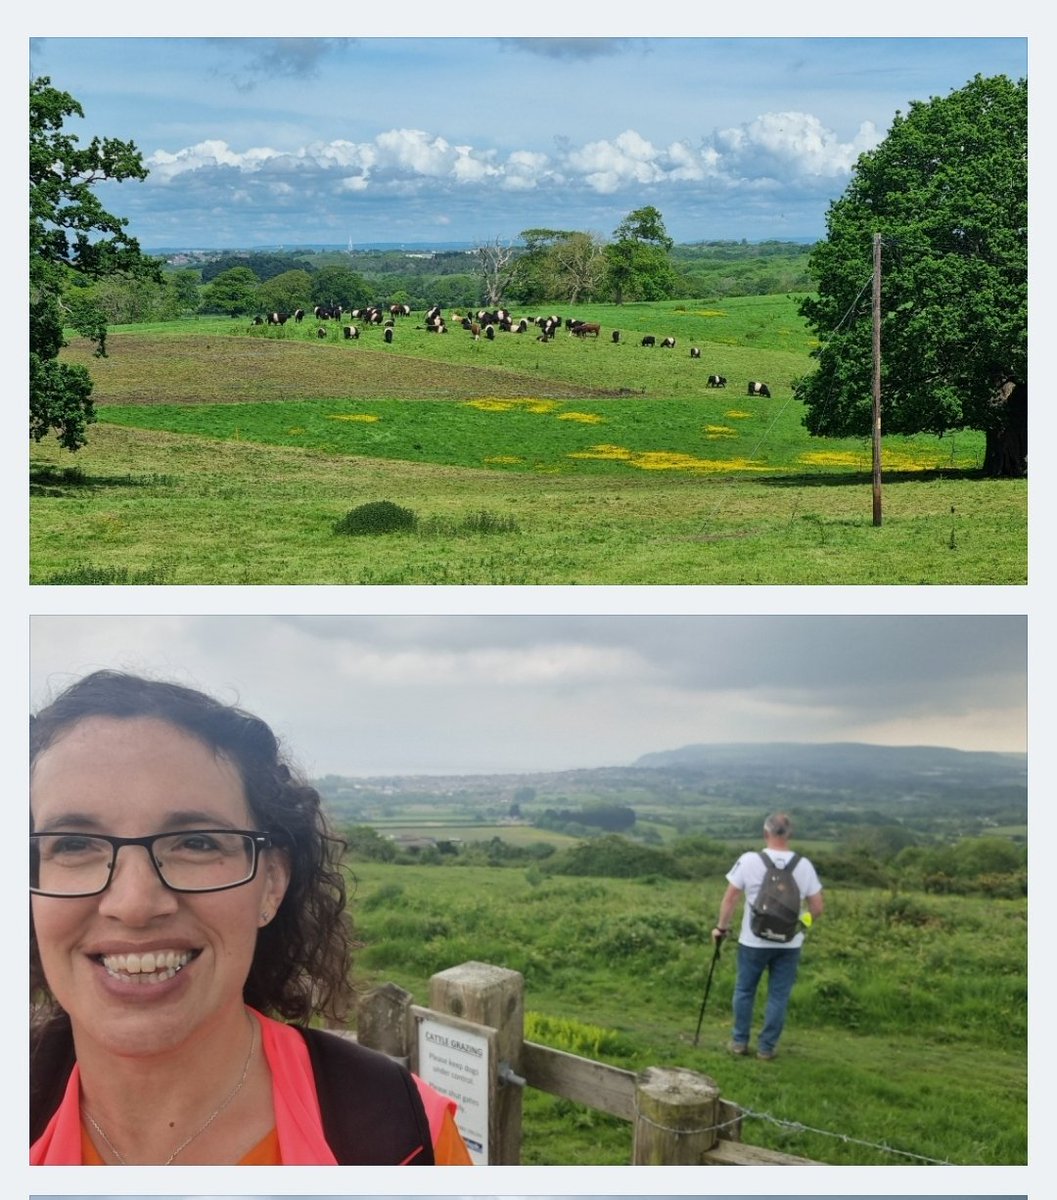 Led nearly 20 walkers today as part of the @IWWalkingFest . I spoke about the history & geology & rewilding projects from Ryde to Nunwell to Brading. Everyone was so positive- some even said they'd watch out for any future walks I did! Such a privilege to be part of the festival.